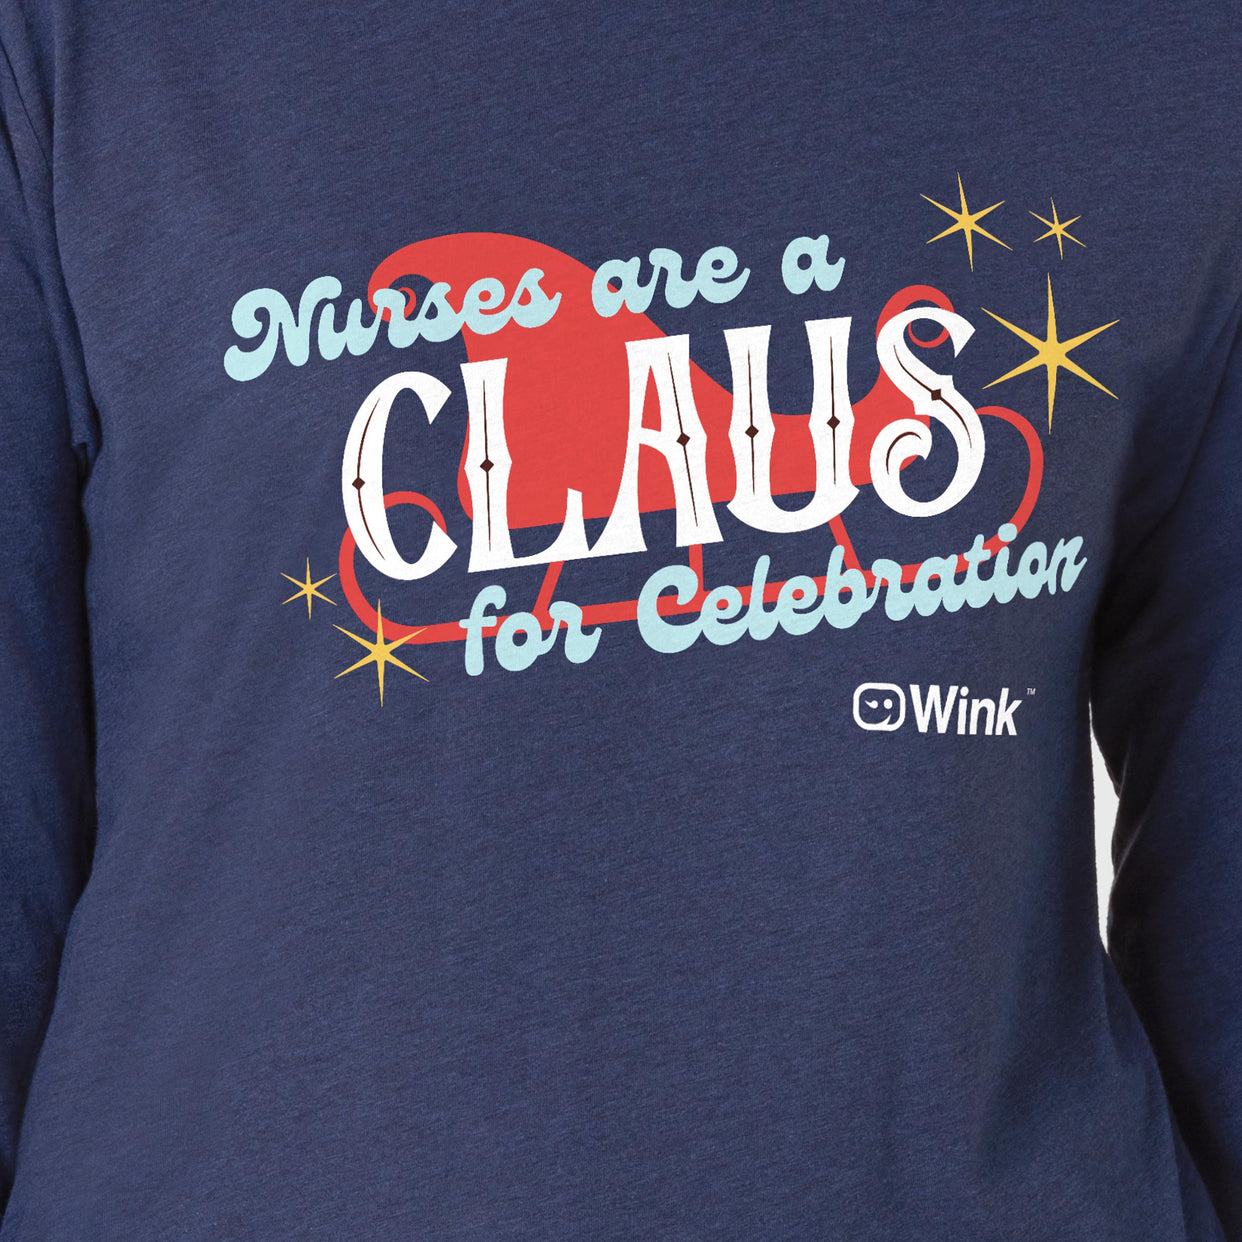 Unisex Long Sleeve Holiday Tee Clause For Celebration closeup view